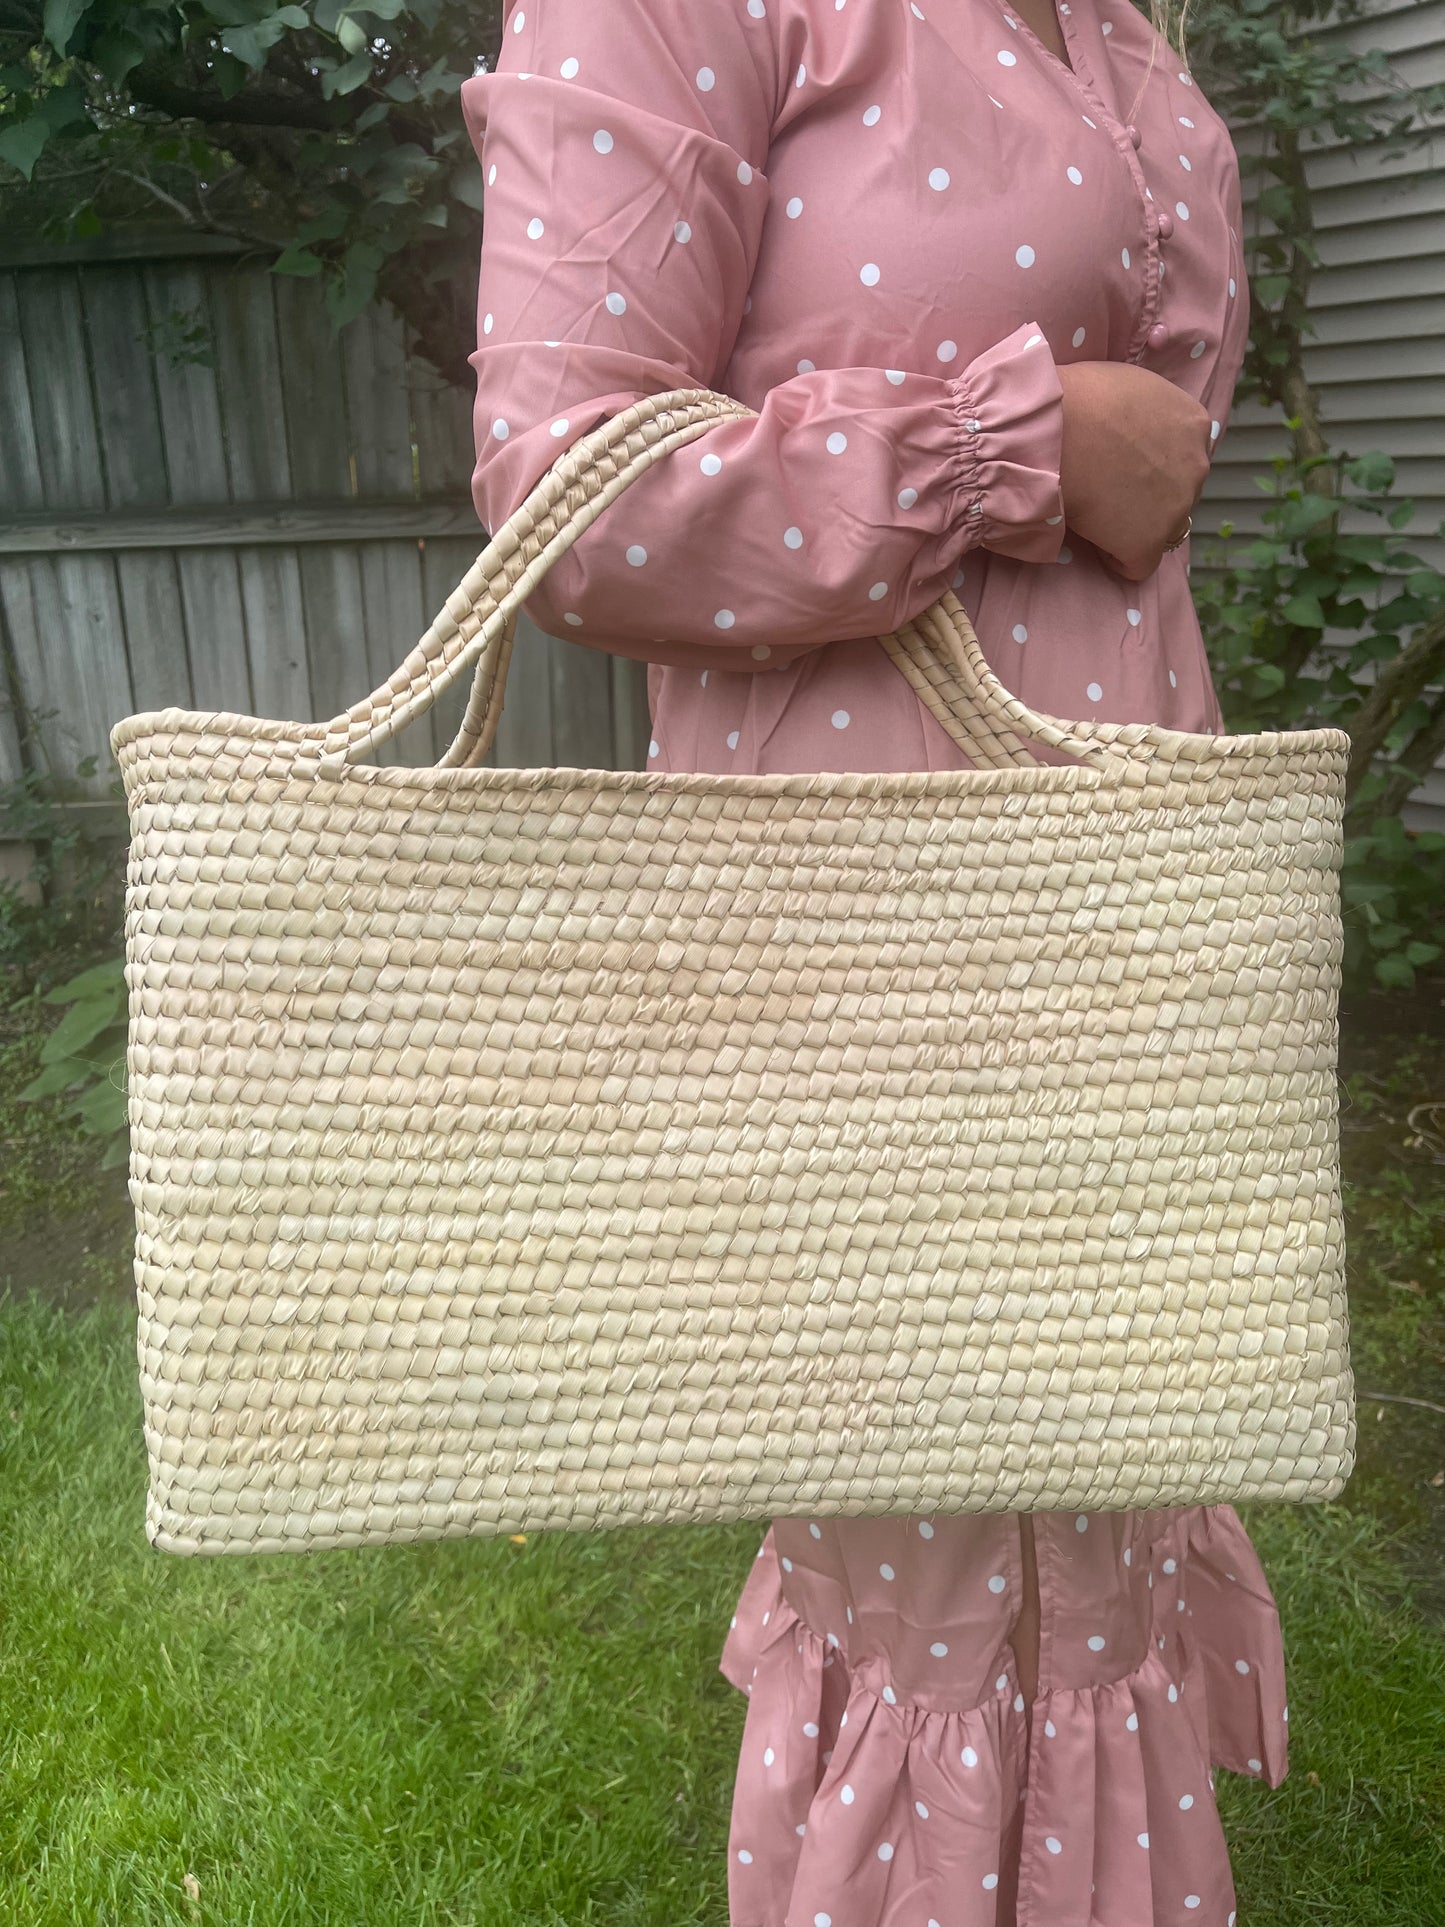 MOMMY And Mini Market Tote